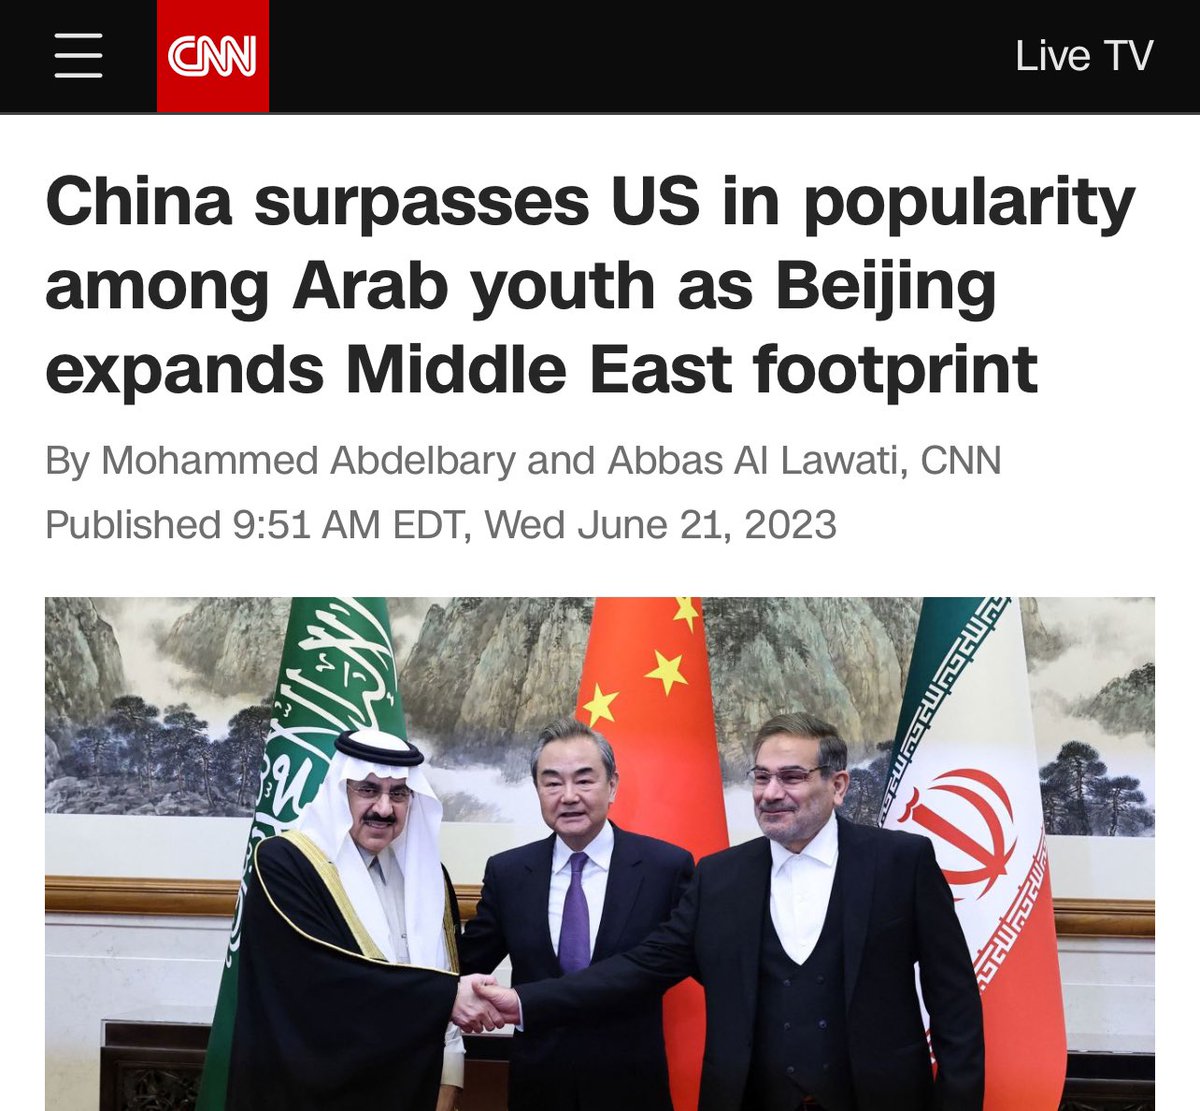 US illegal wars in the Middle East have not gone unobserved by the Arab community. China has instead been increasing trade via the Belt and Road, currency swaps, people-to-people exchanges, and investment. Consequently '80% of Arab youth view China as an ally.' #China